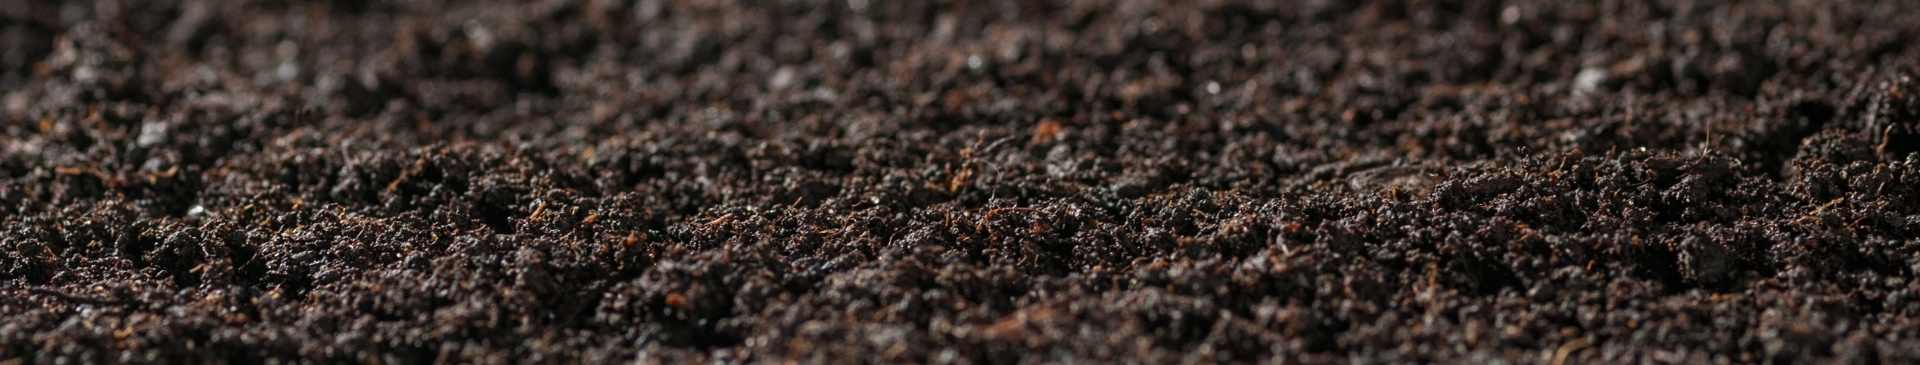 Worms, Vinegar, and Baking Soda: Testing Your Garden Soil the Old-Fashioned Way